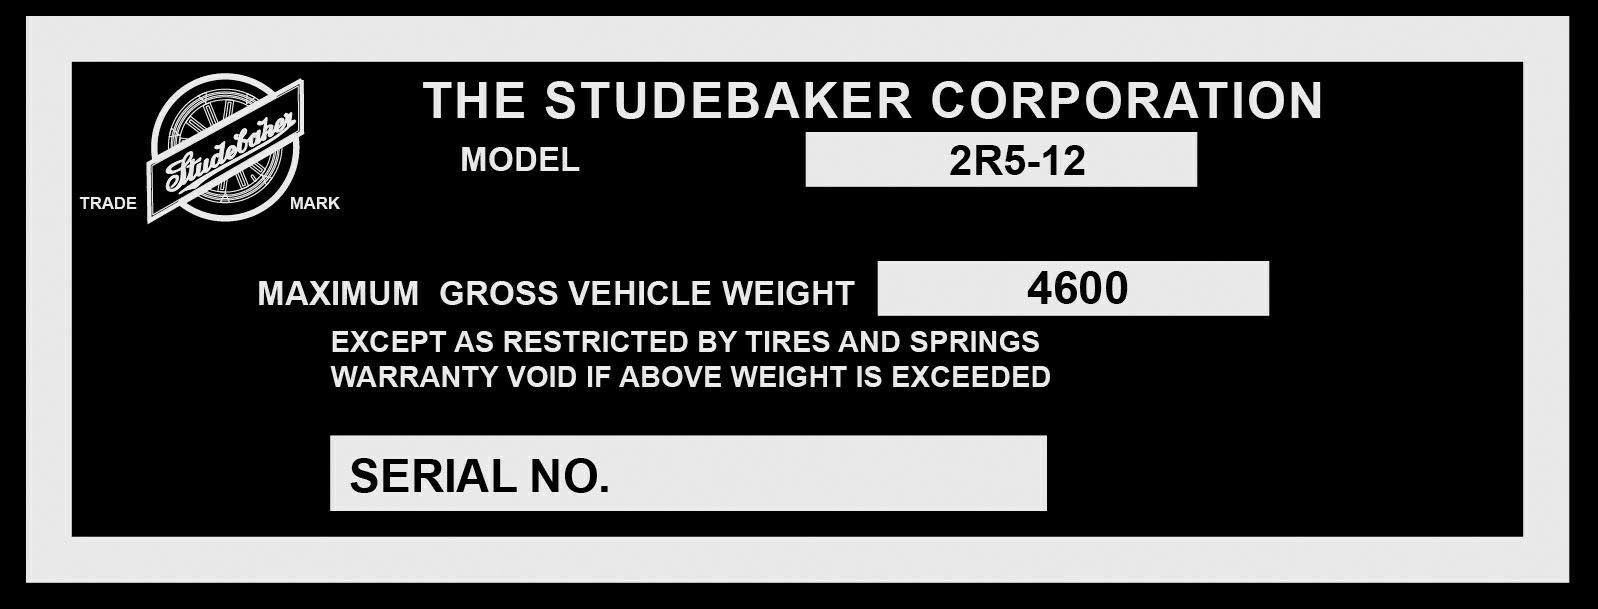 STUDEBAKER Pickup Truck SERIAL NUMBER DATA PLATE ID TAG correct 1949 plus